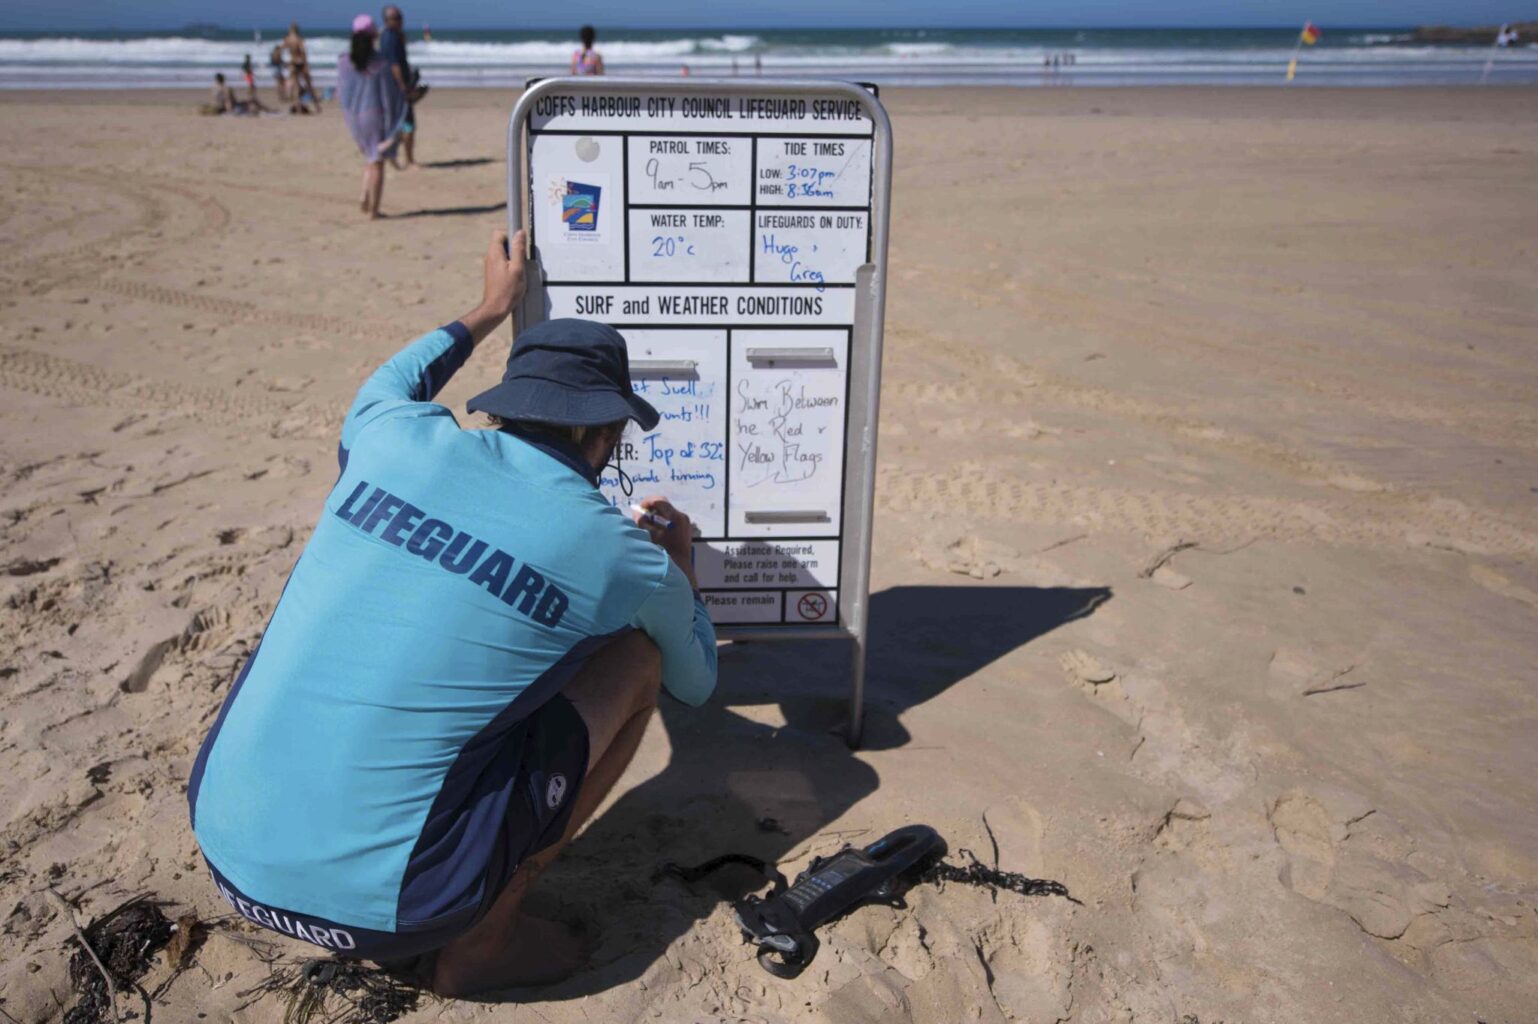 Important information about rips and beach conditions can be found on the information boards